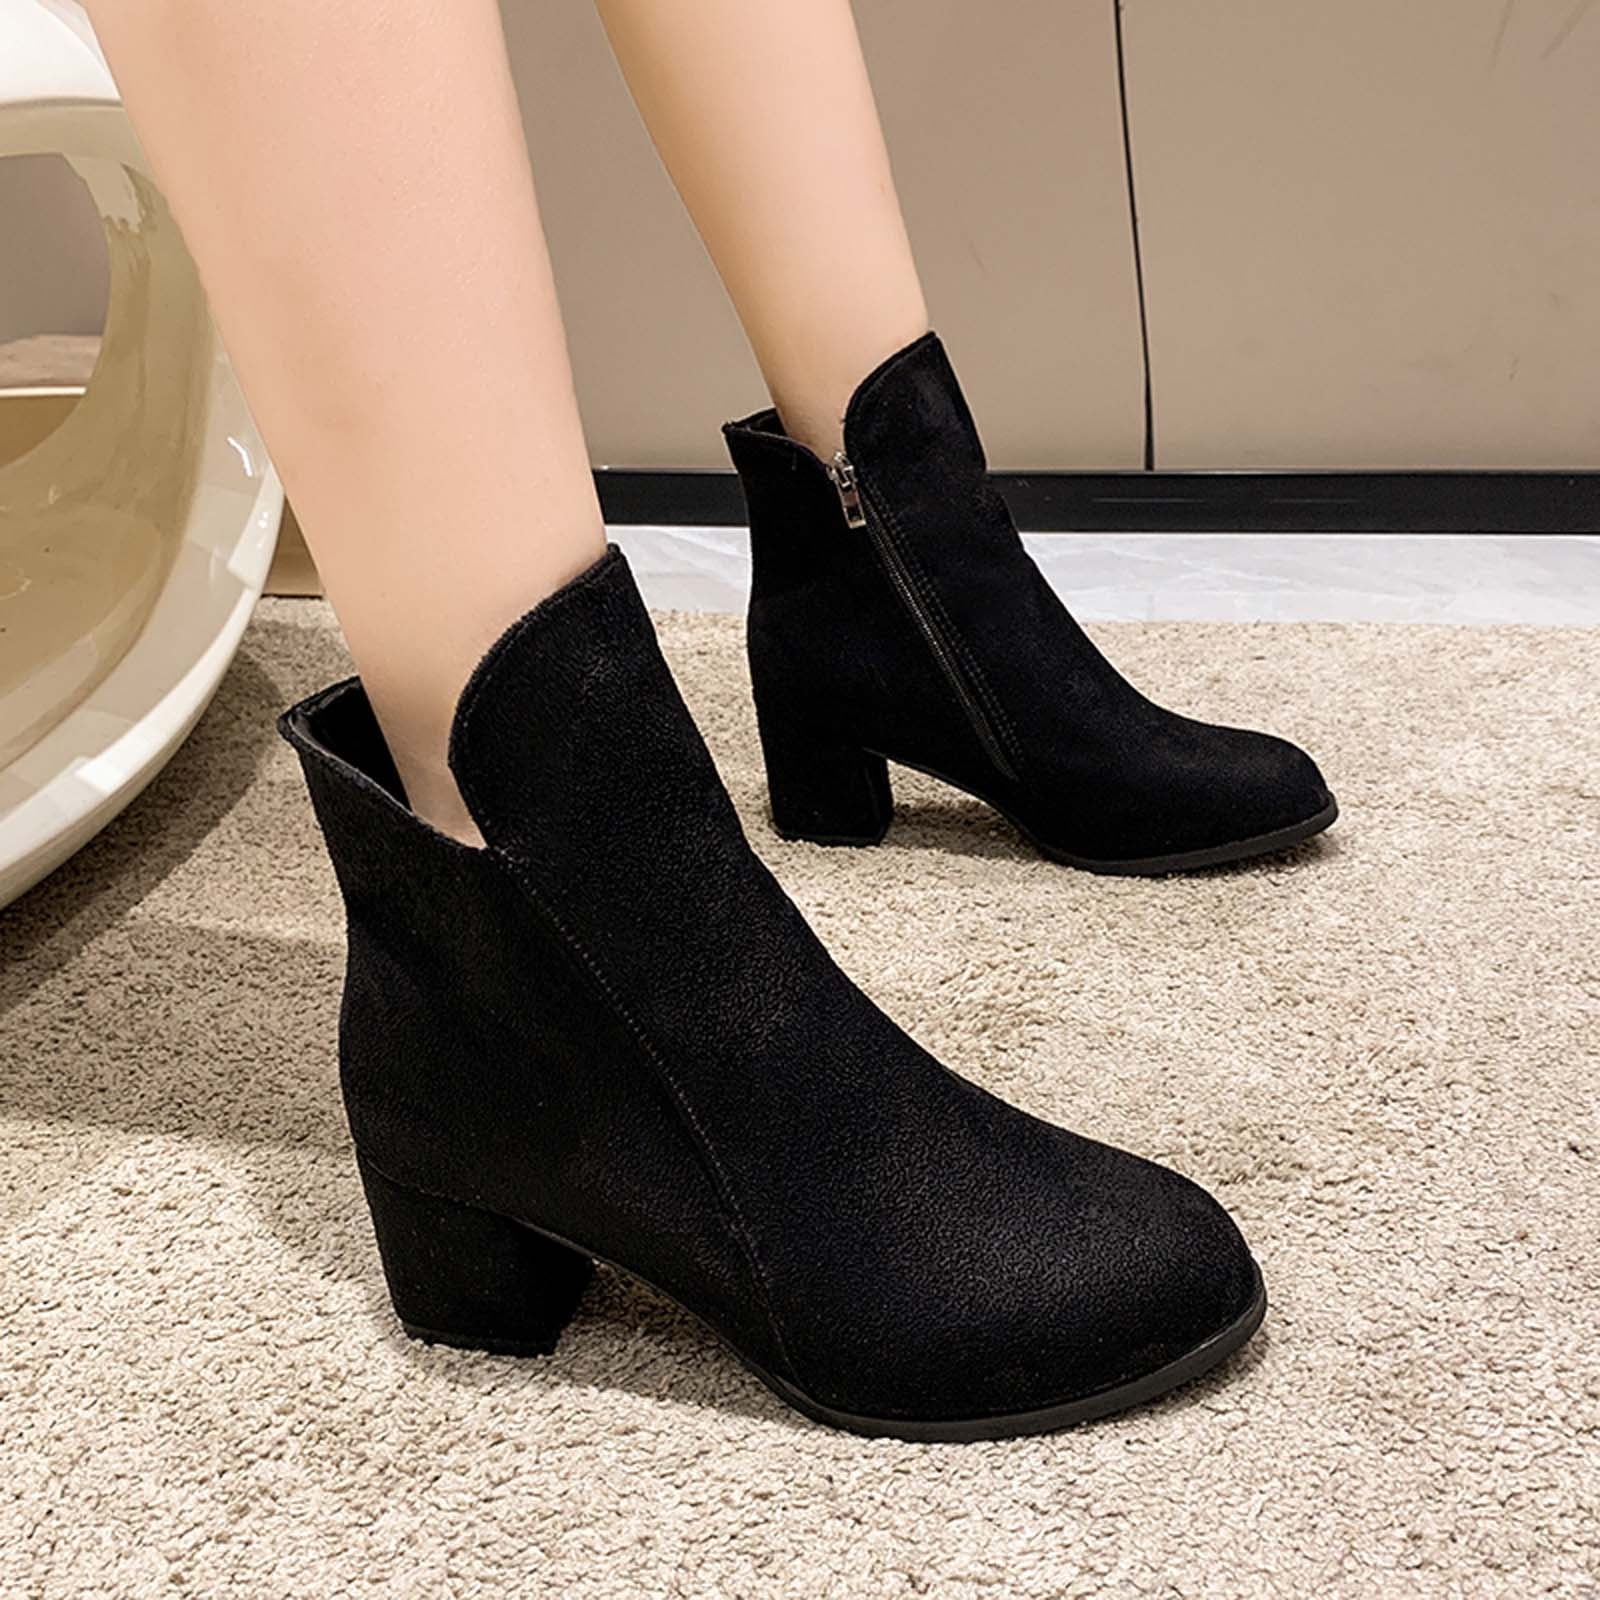  Women Low Heel Ankle Booties Slip On Vegan Suede Leather Cut  Out Chunky Block Stacked Peep Toe Ankle Boots Shoes Black